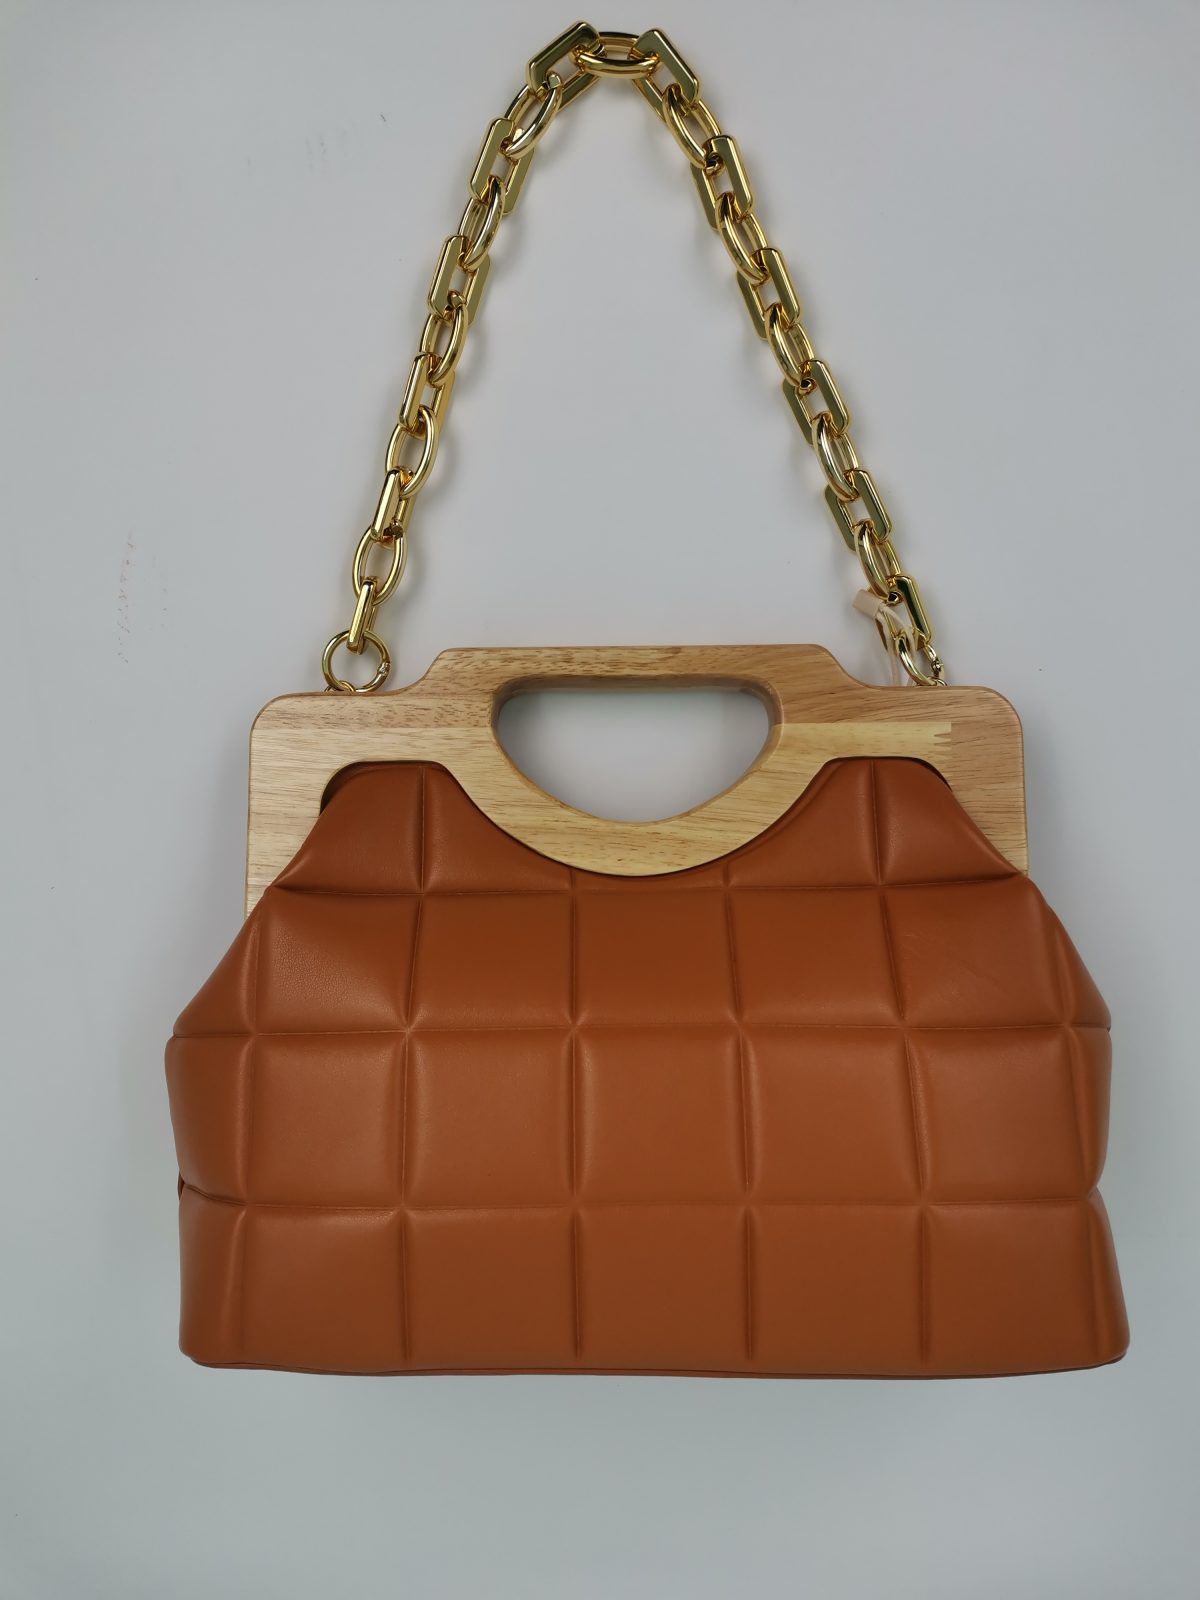 Brown  bag with wooden handle and gold chain